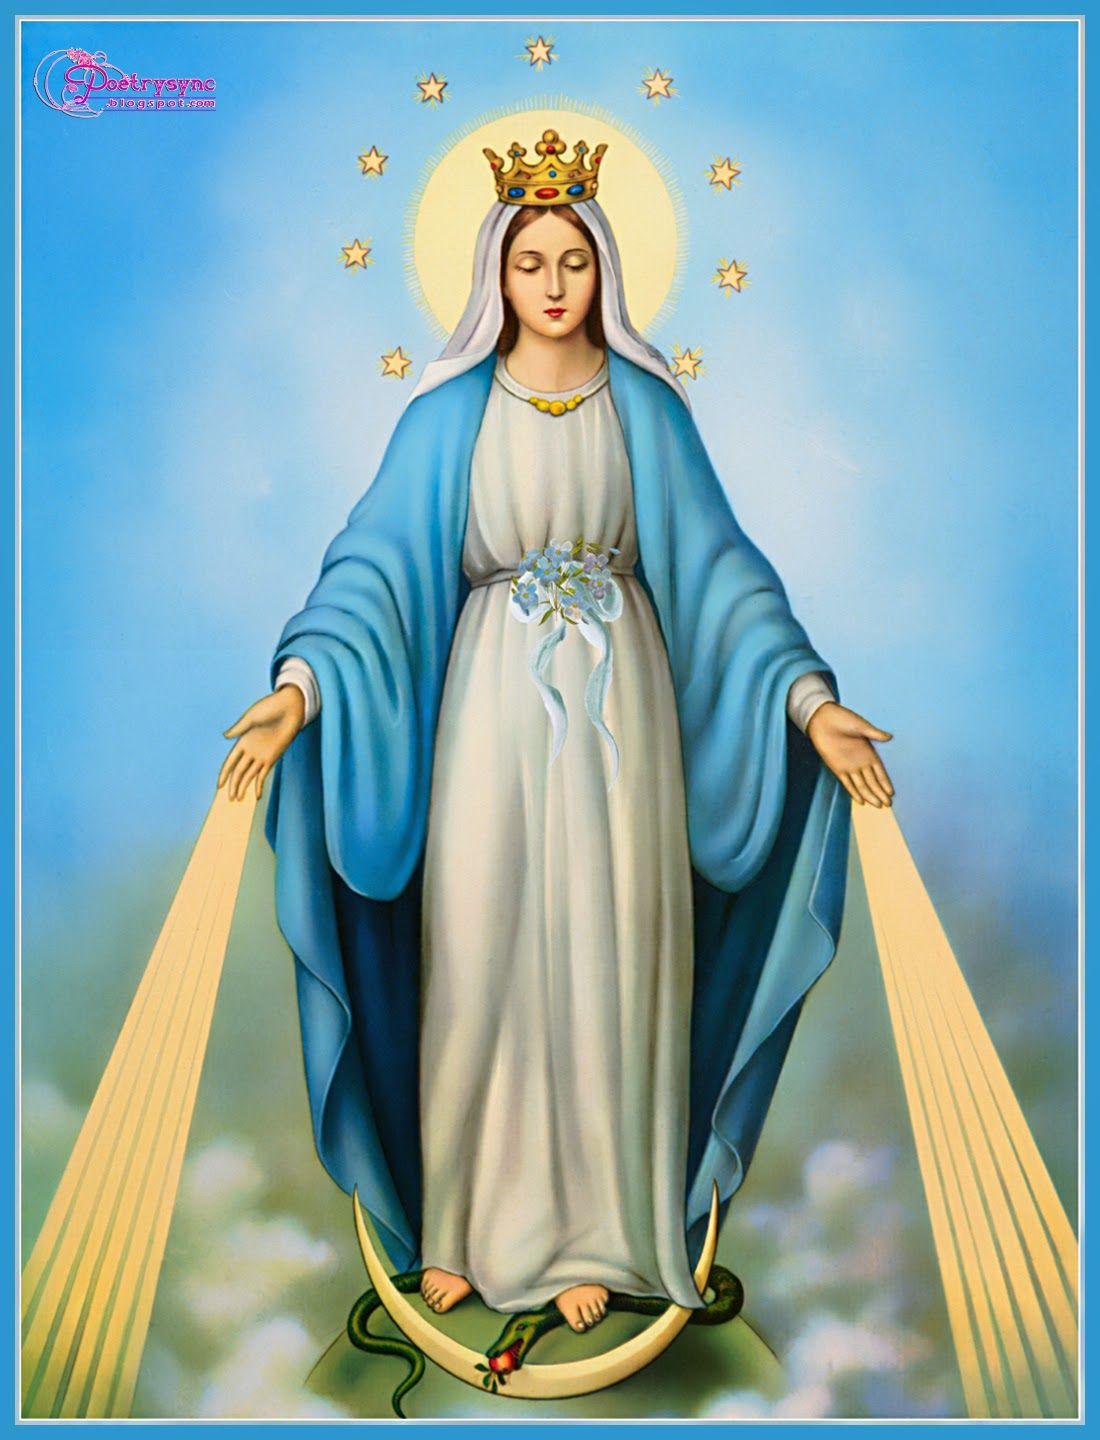 Virgin Mary Wallpaper PIC WSW10813597 Wallpaper Collections